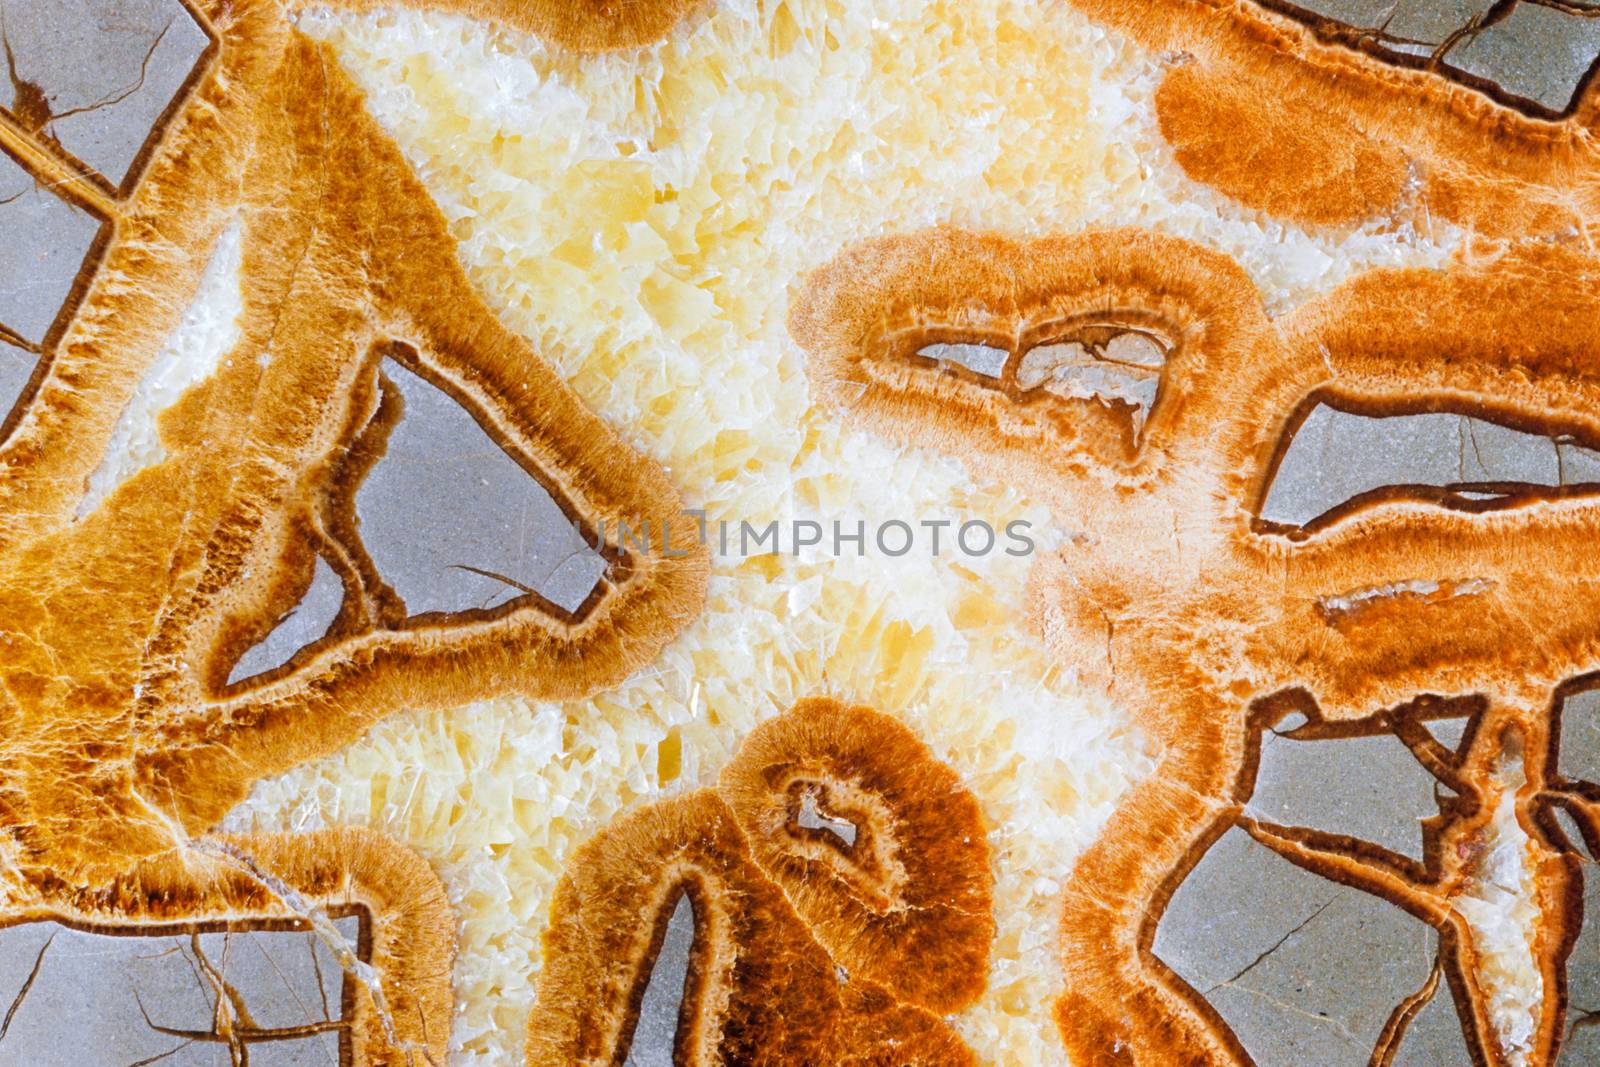 Septarian concretion grey mud stone with yellow scalenohedral calcite crystals polished rock surface details closeup